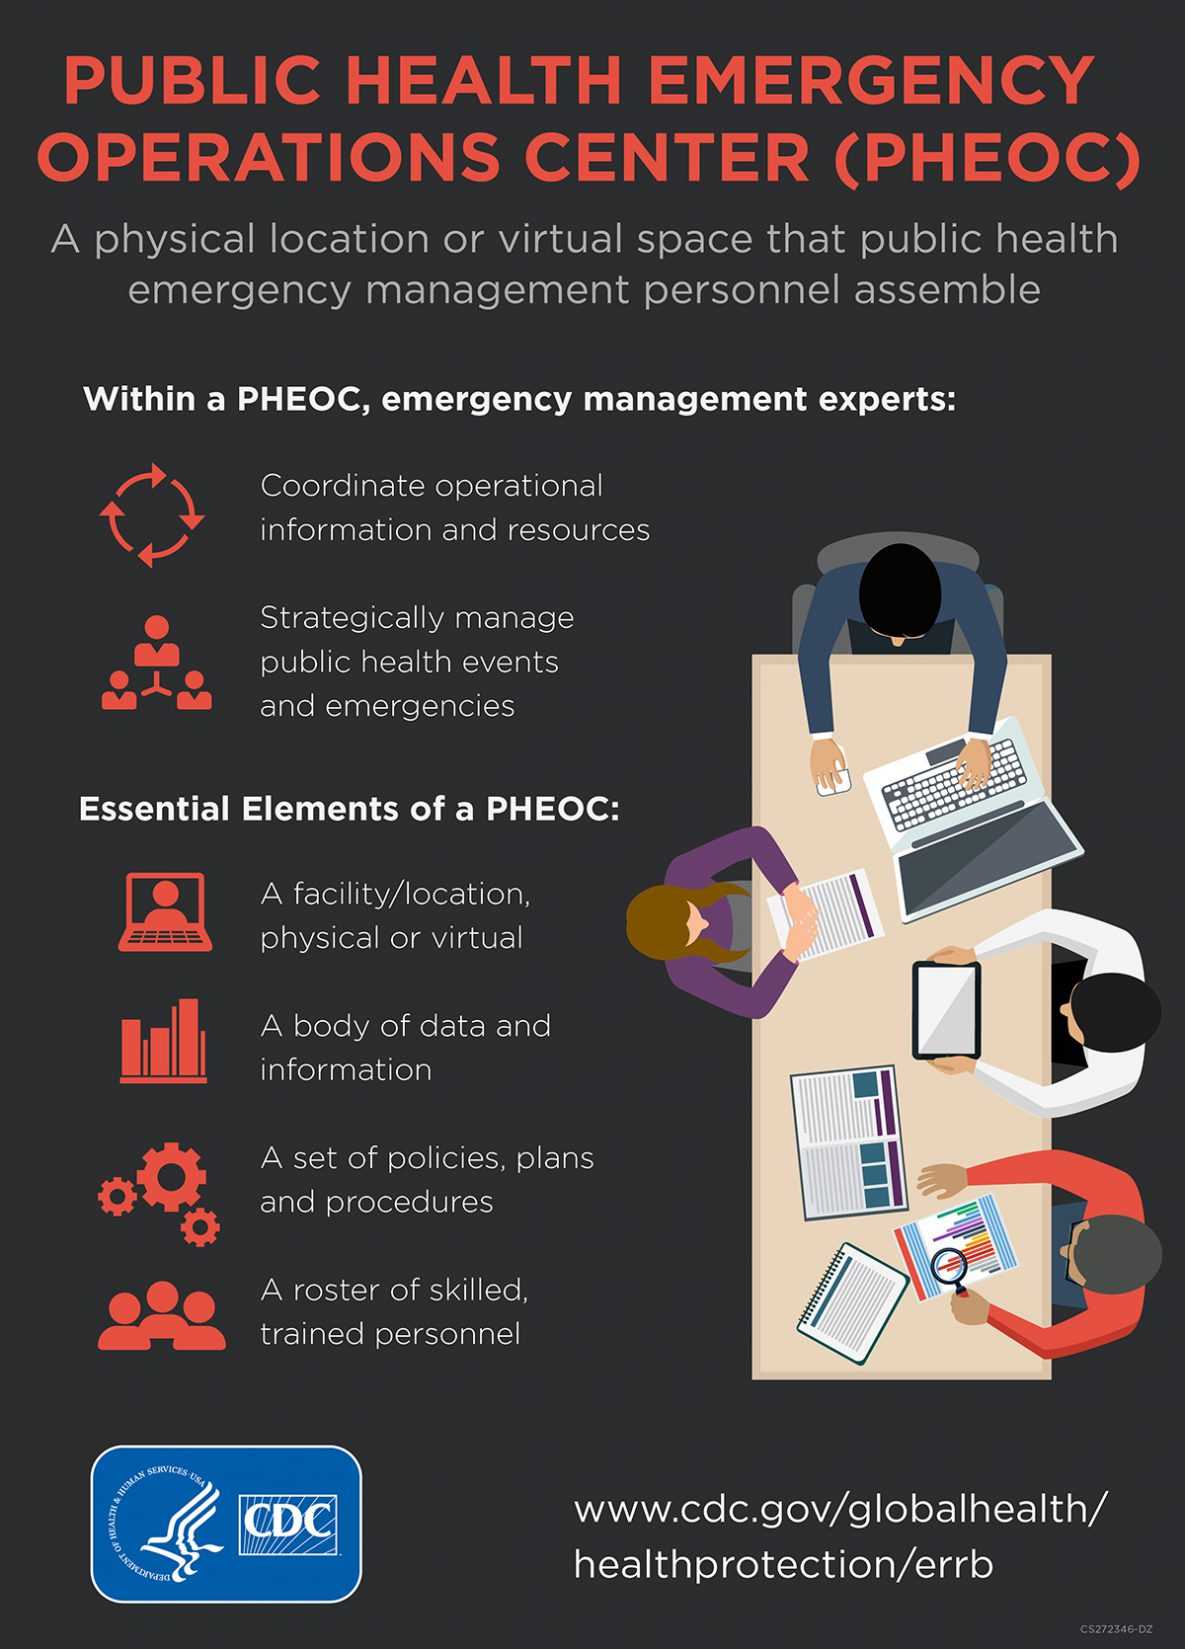 Public Health Emergency Operations Center (PHEOC) - A physical location or virtual space that public health emergency management personnel assemble